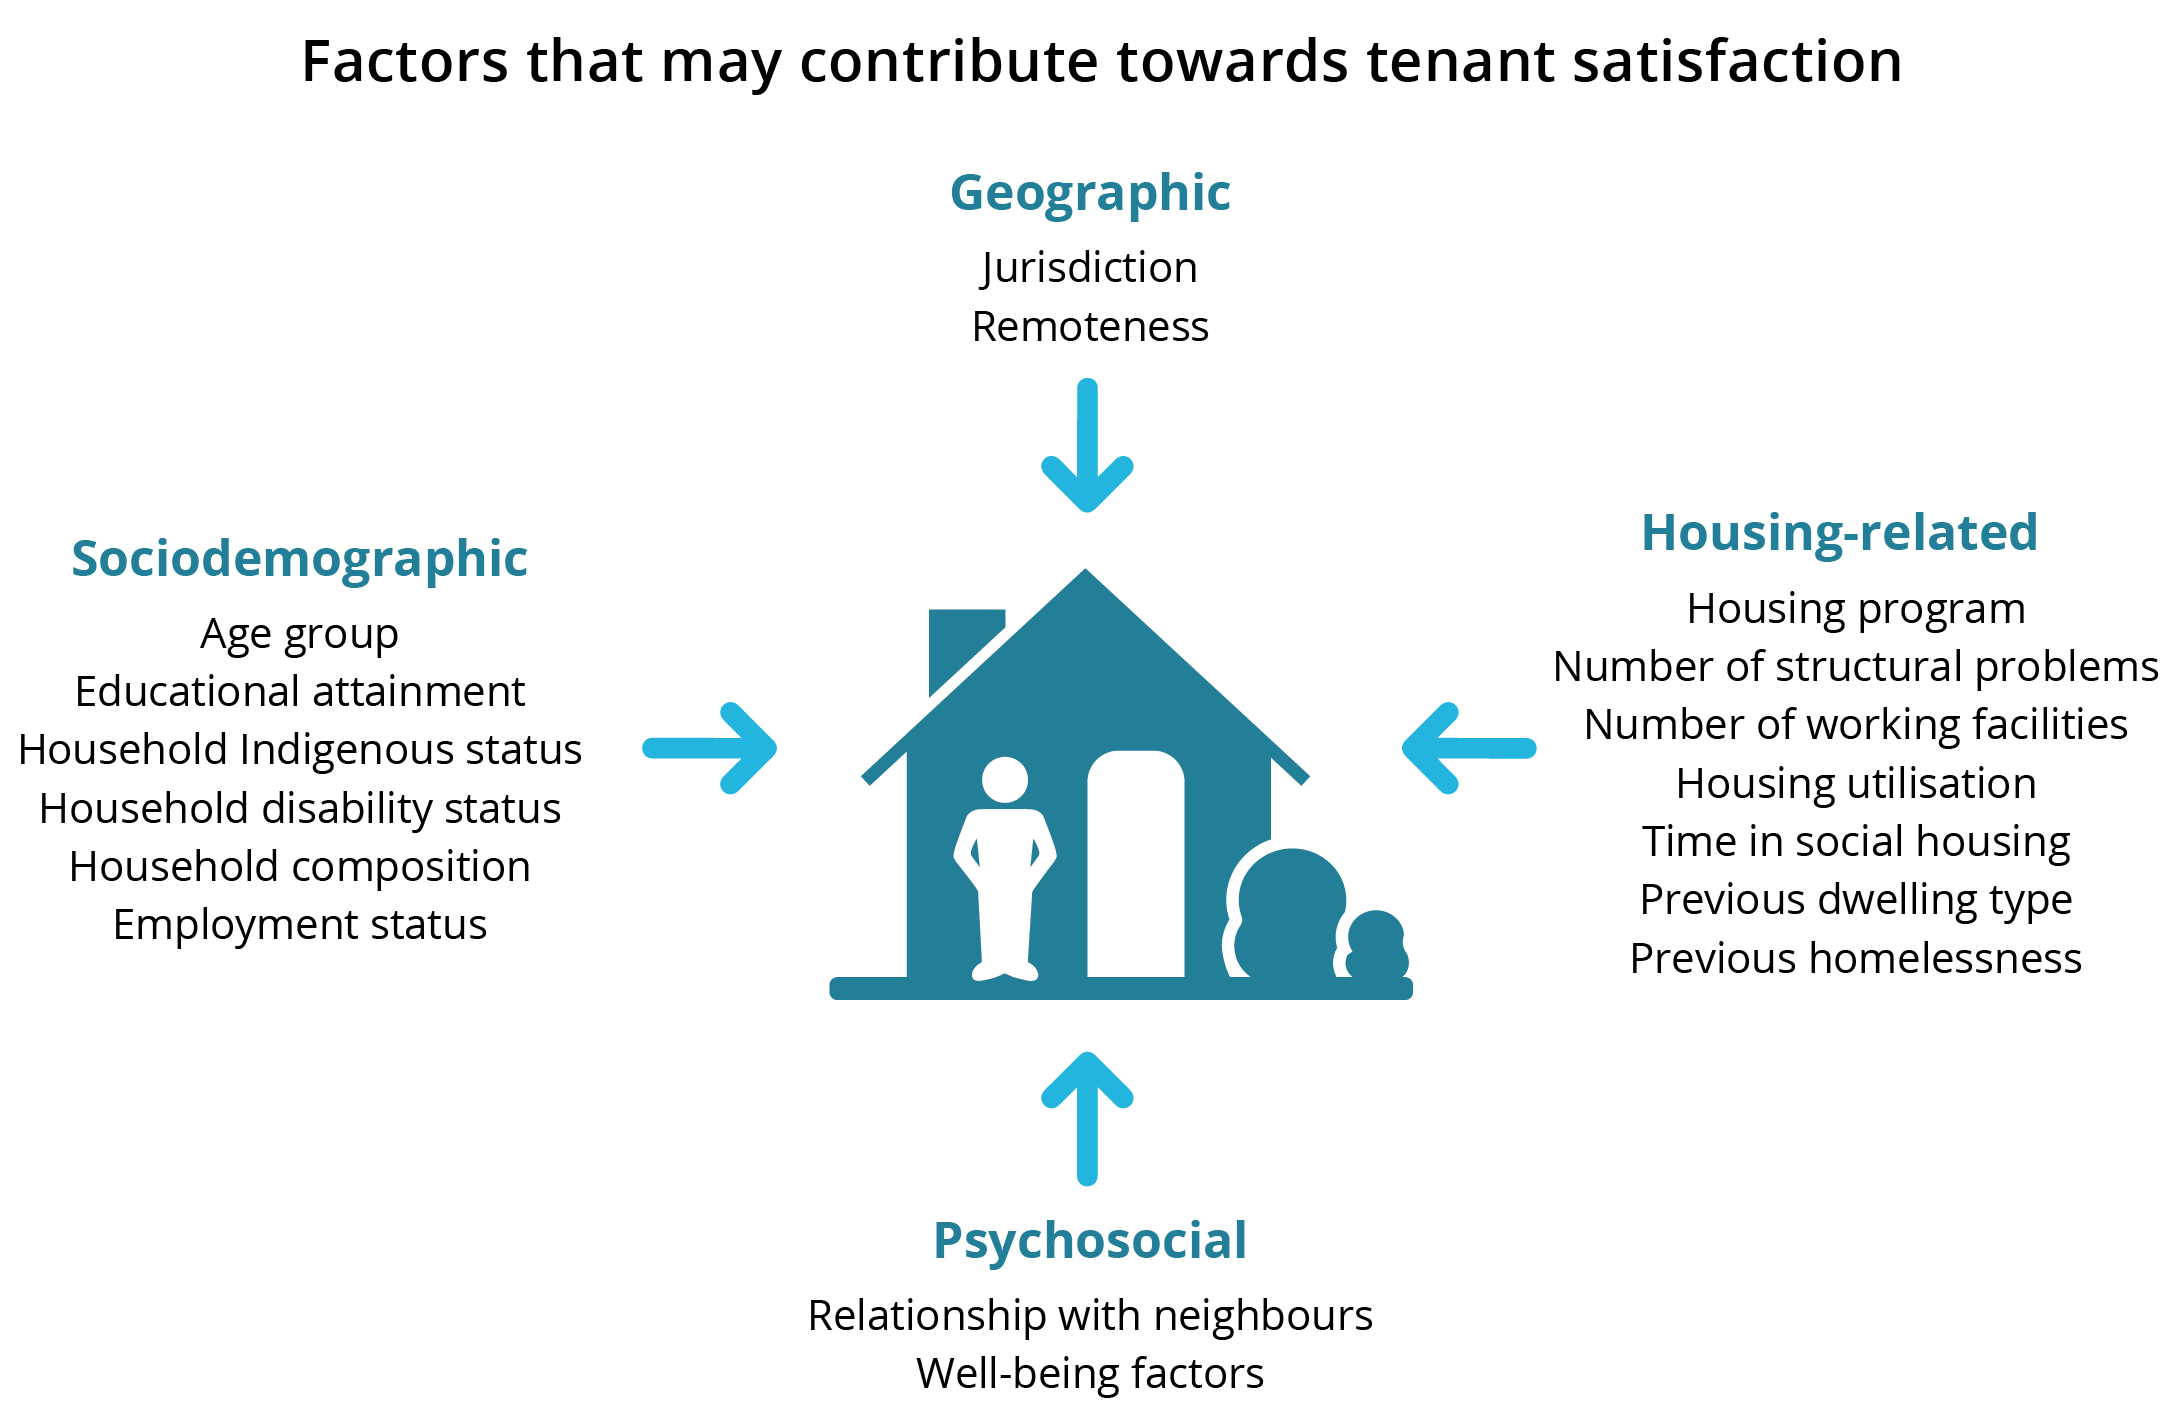 Image is of a stylised house surround by a list of the geographic, sociodemographic, psychosocial and housing-related factors that were included in the regression model.